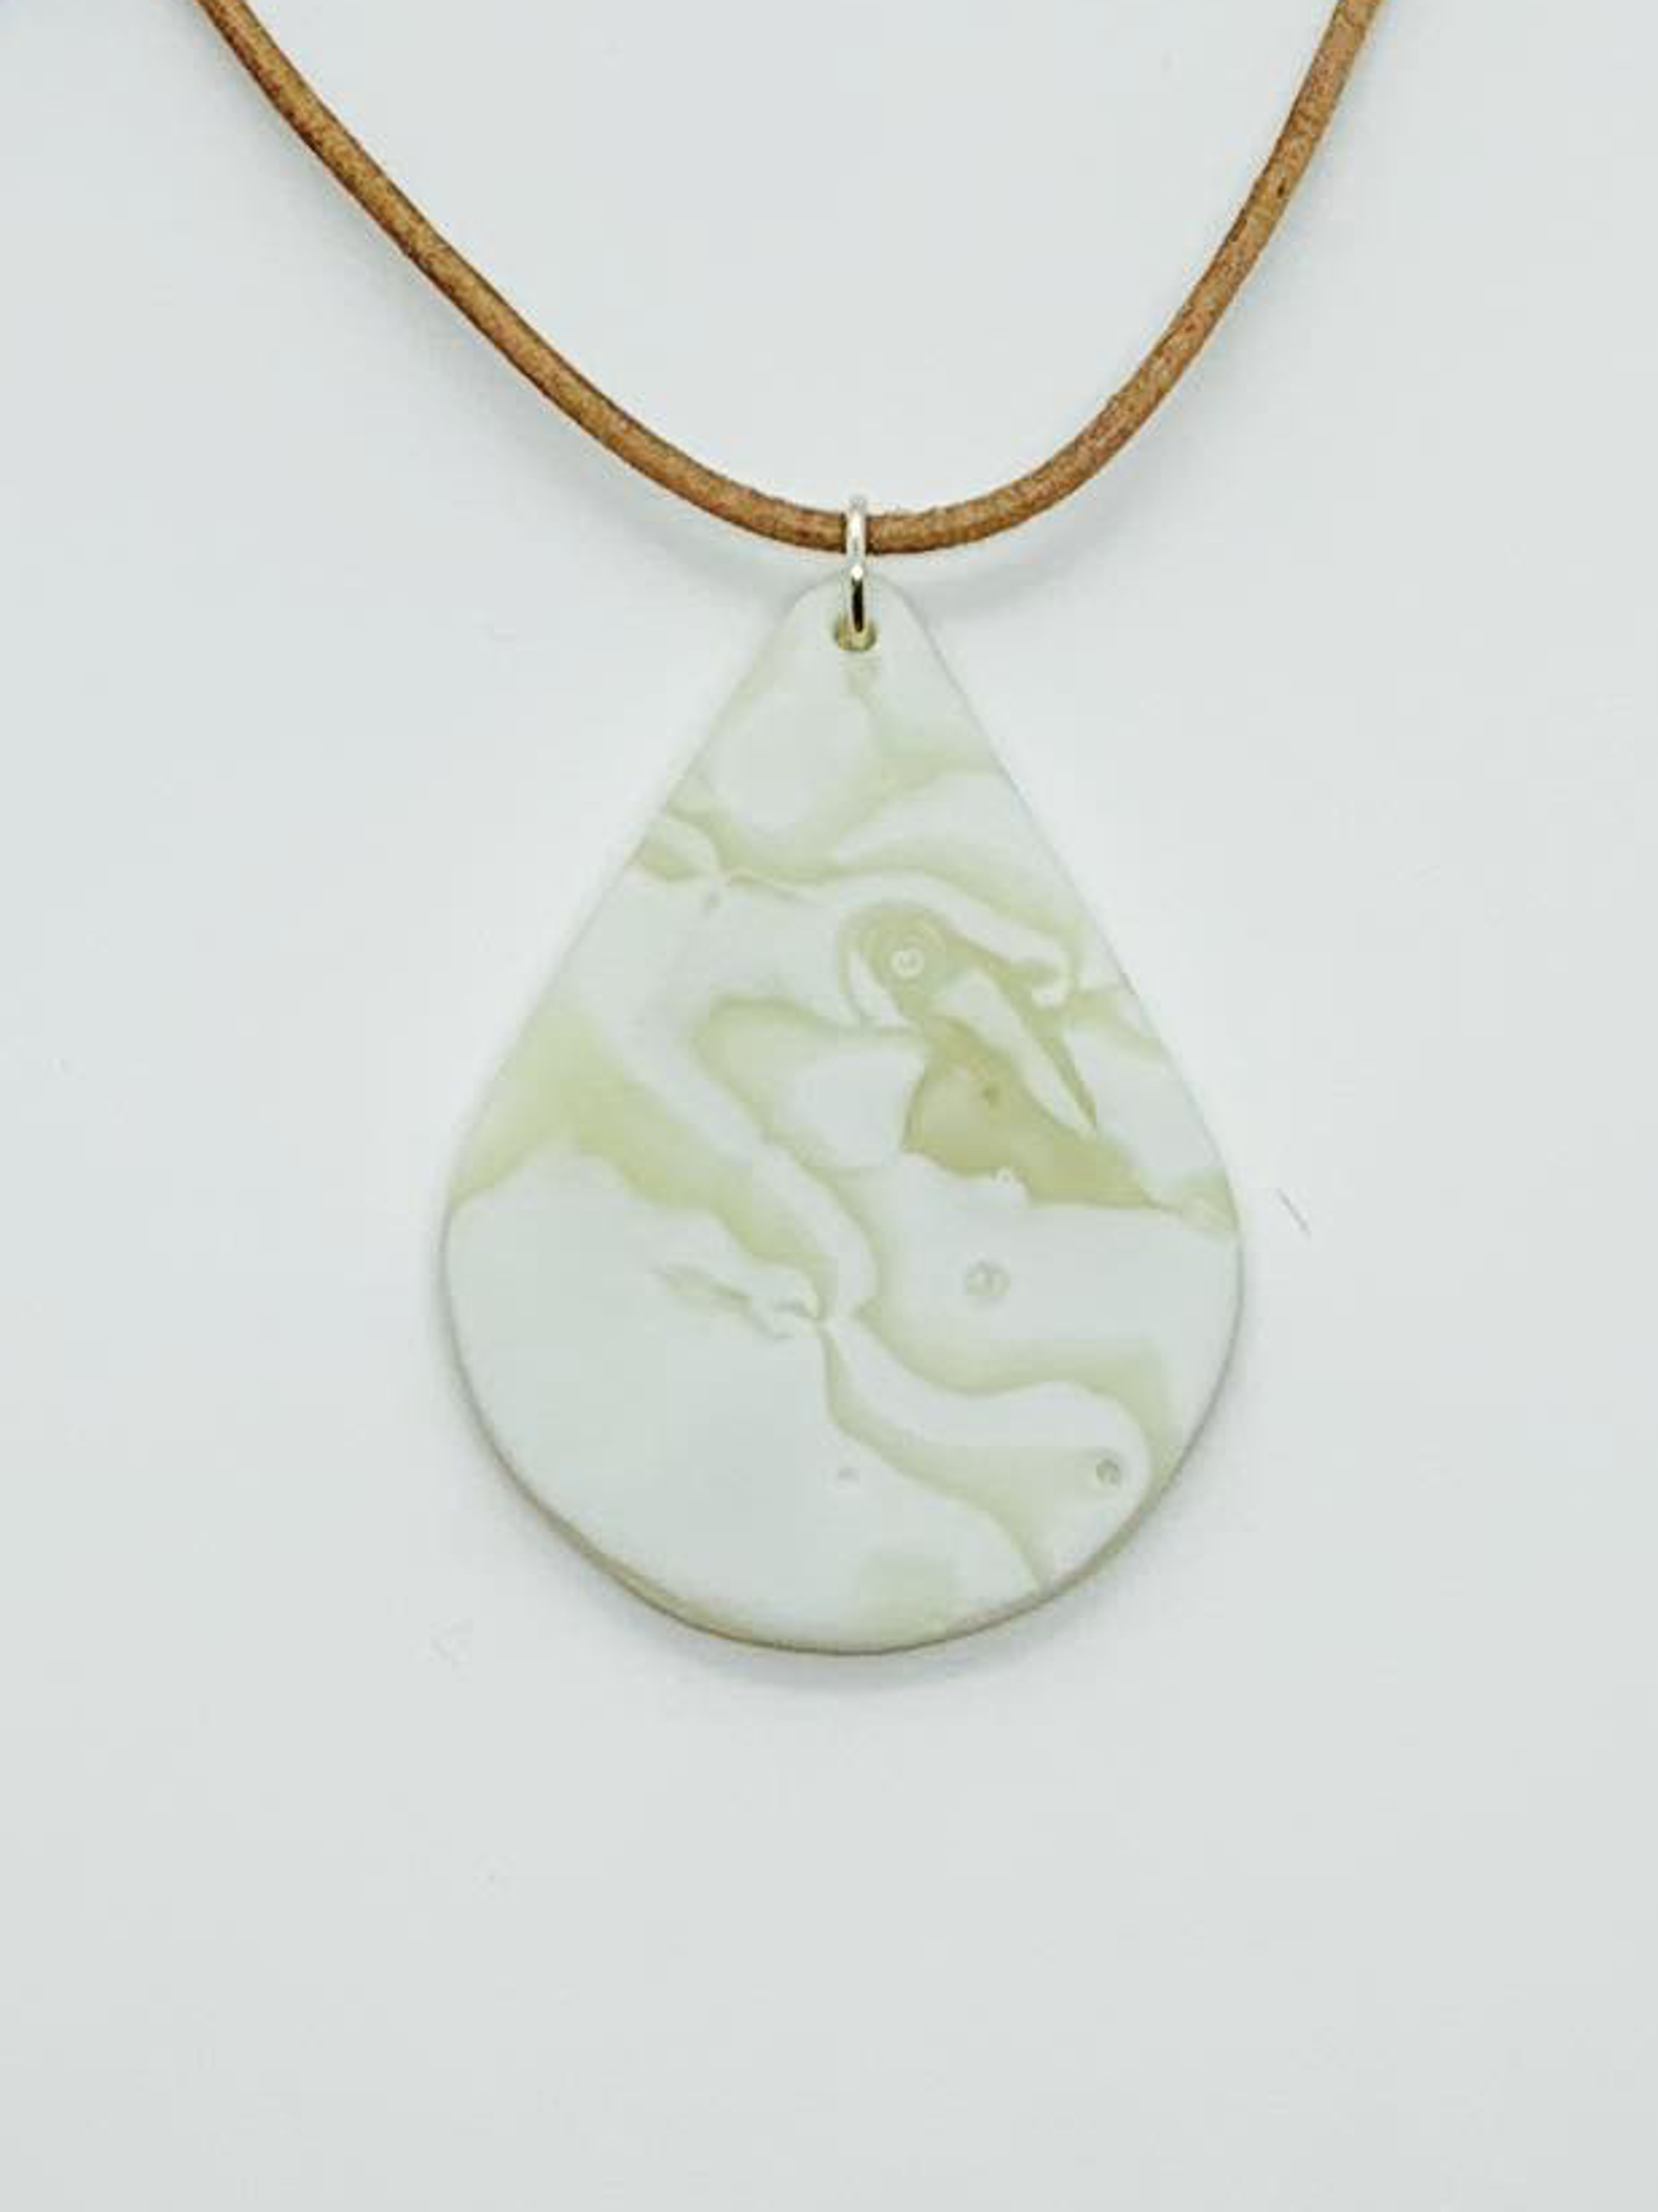 Molten Glass Necklace Teardrop by Chris Cox